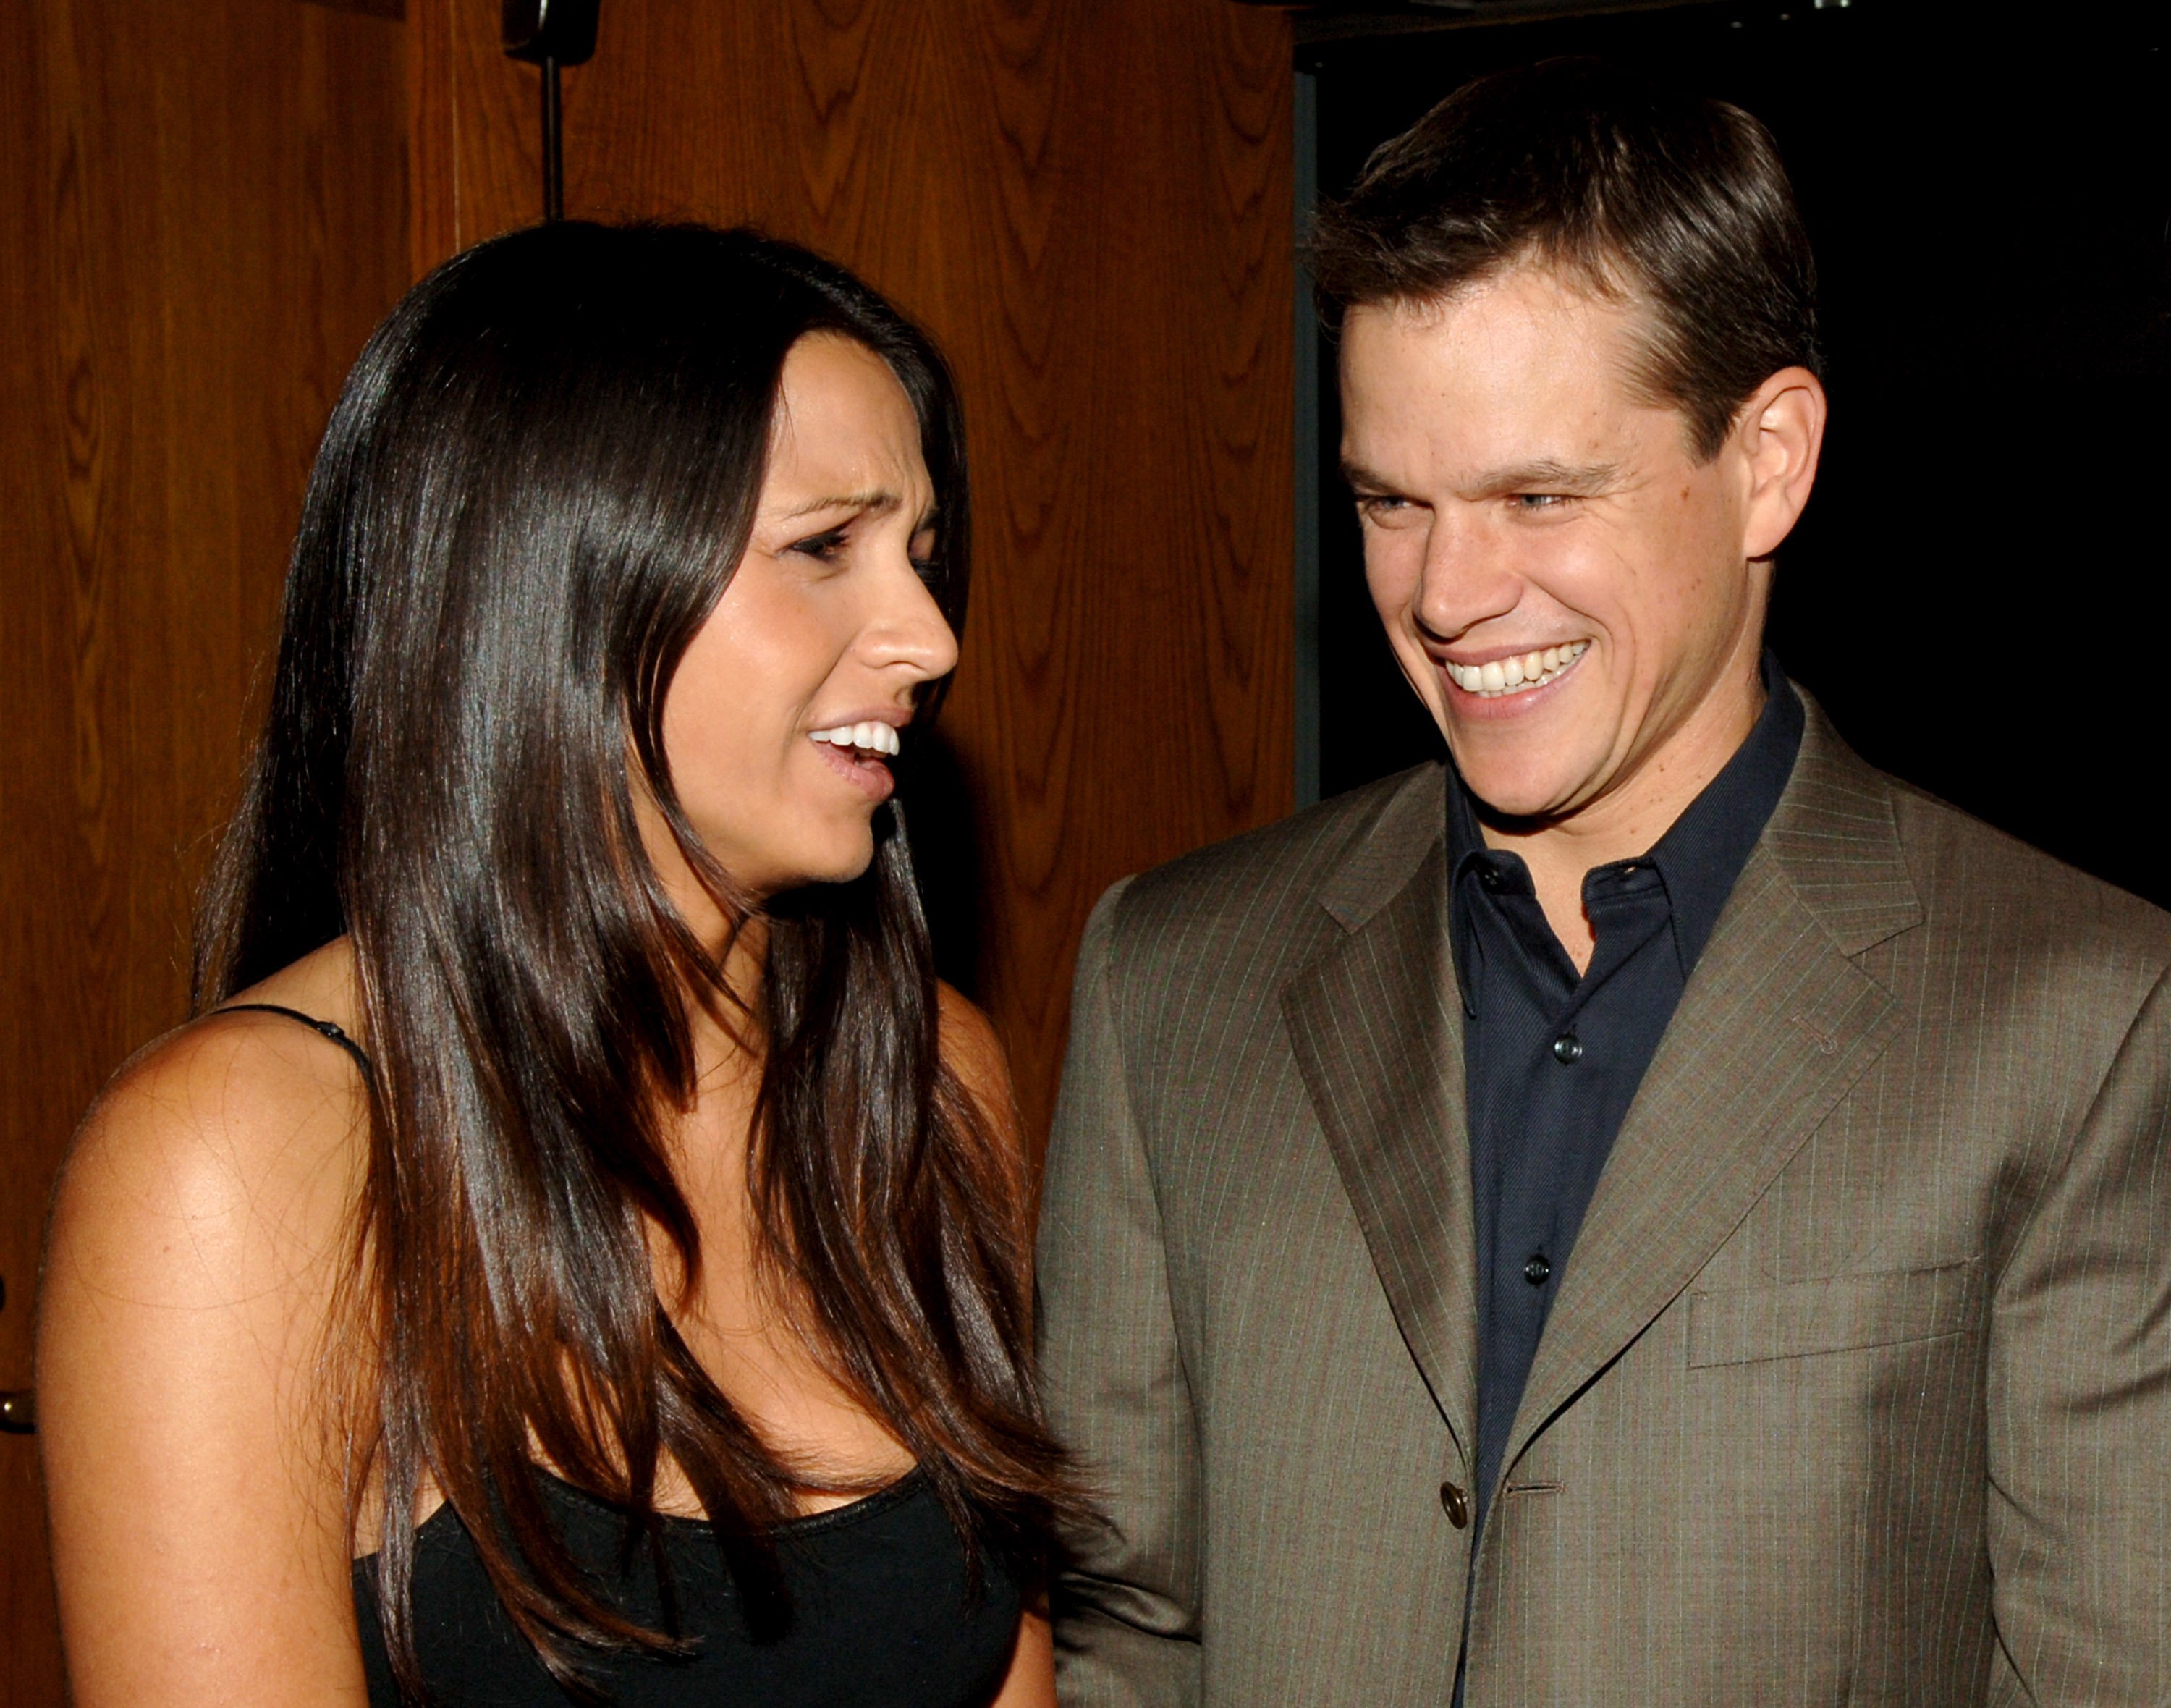 Luciana Barroso and Matt Damon in 2005 in Los Angeles, California | Source: Getty Images